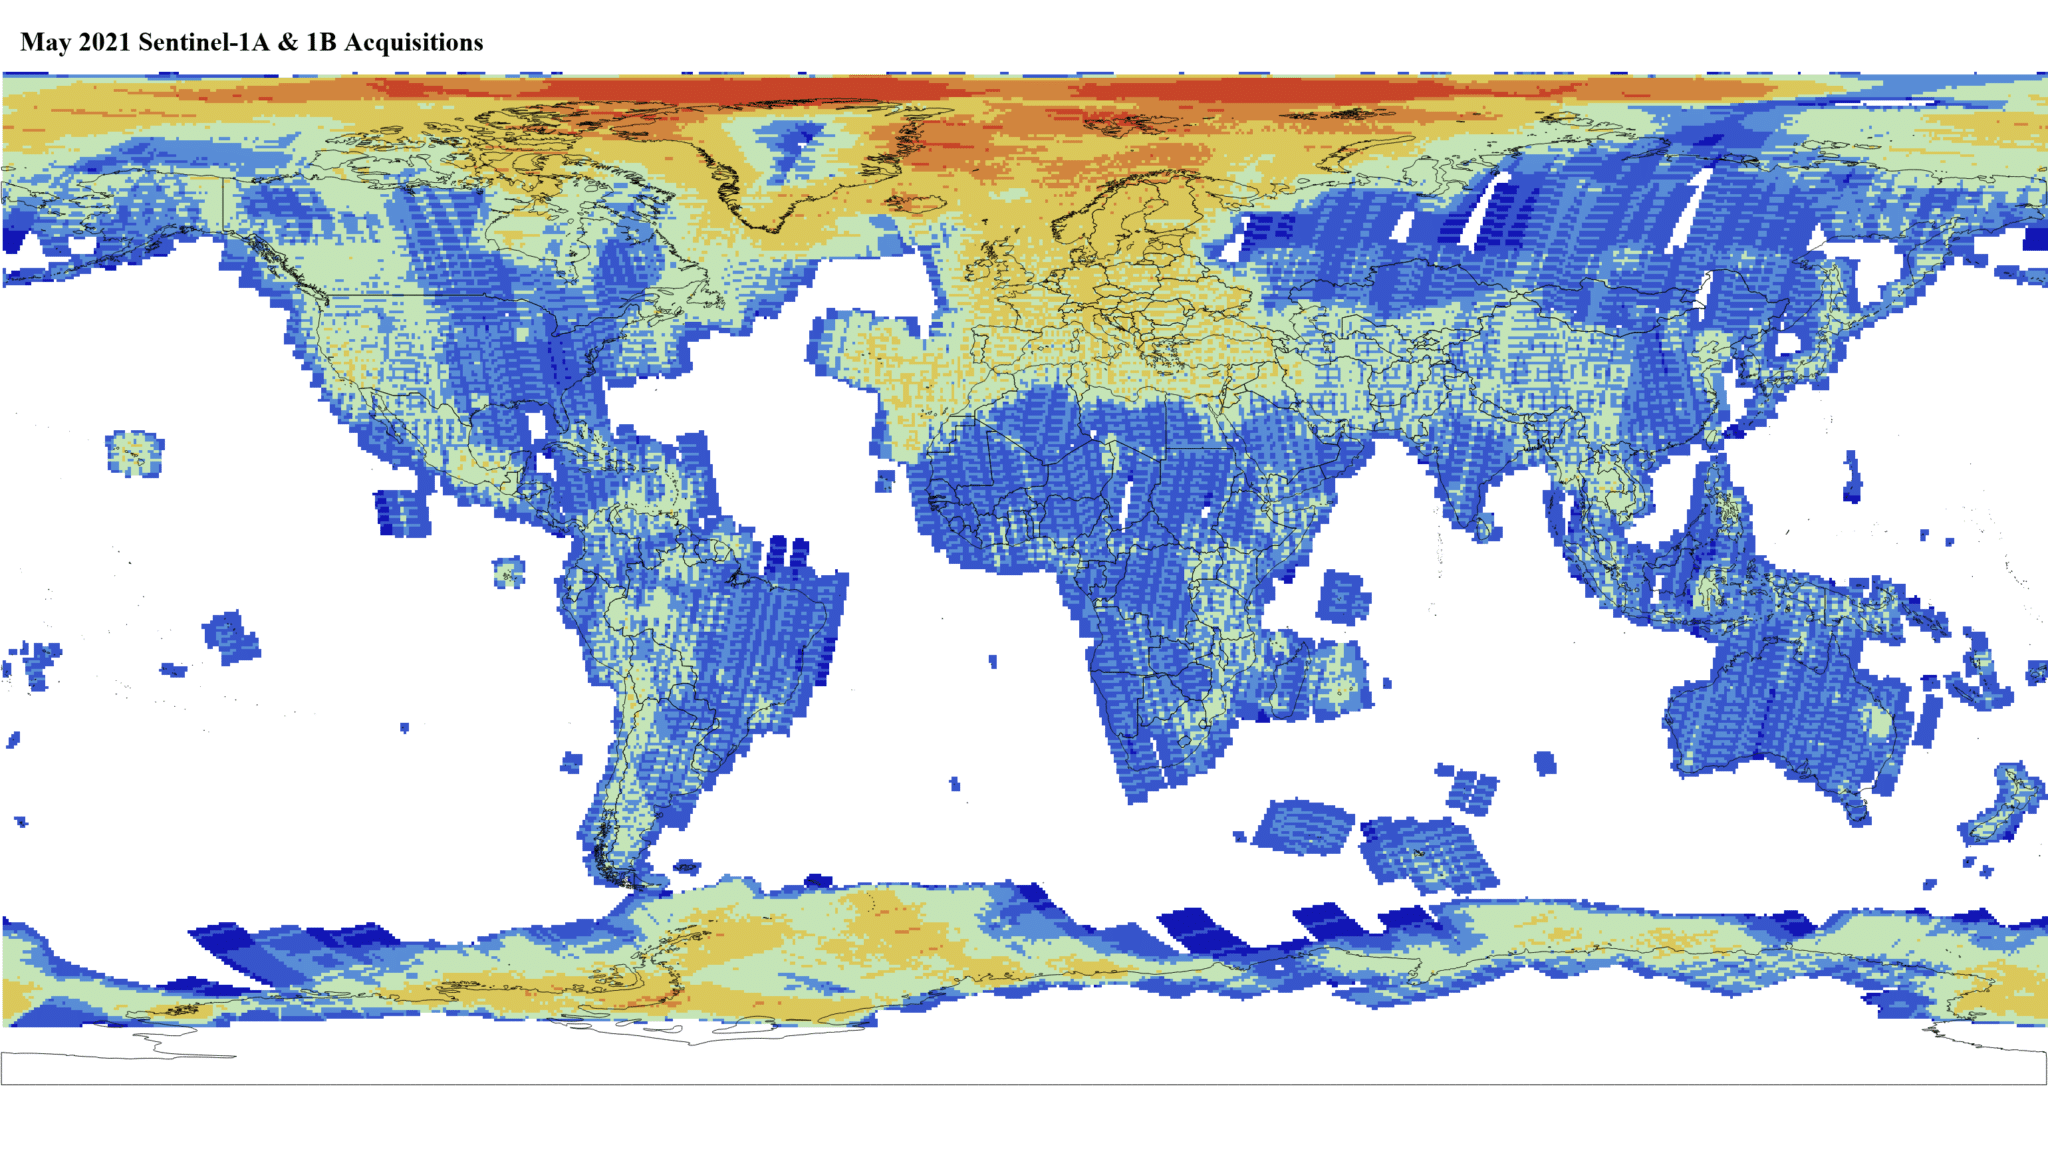 Heat map of Sentinel-1A and -1B GRD global acquisitions May 2021